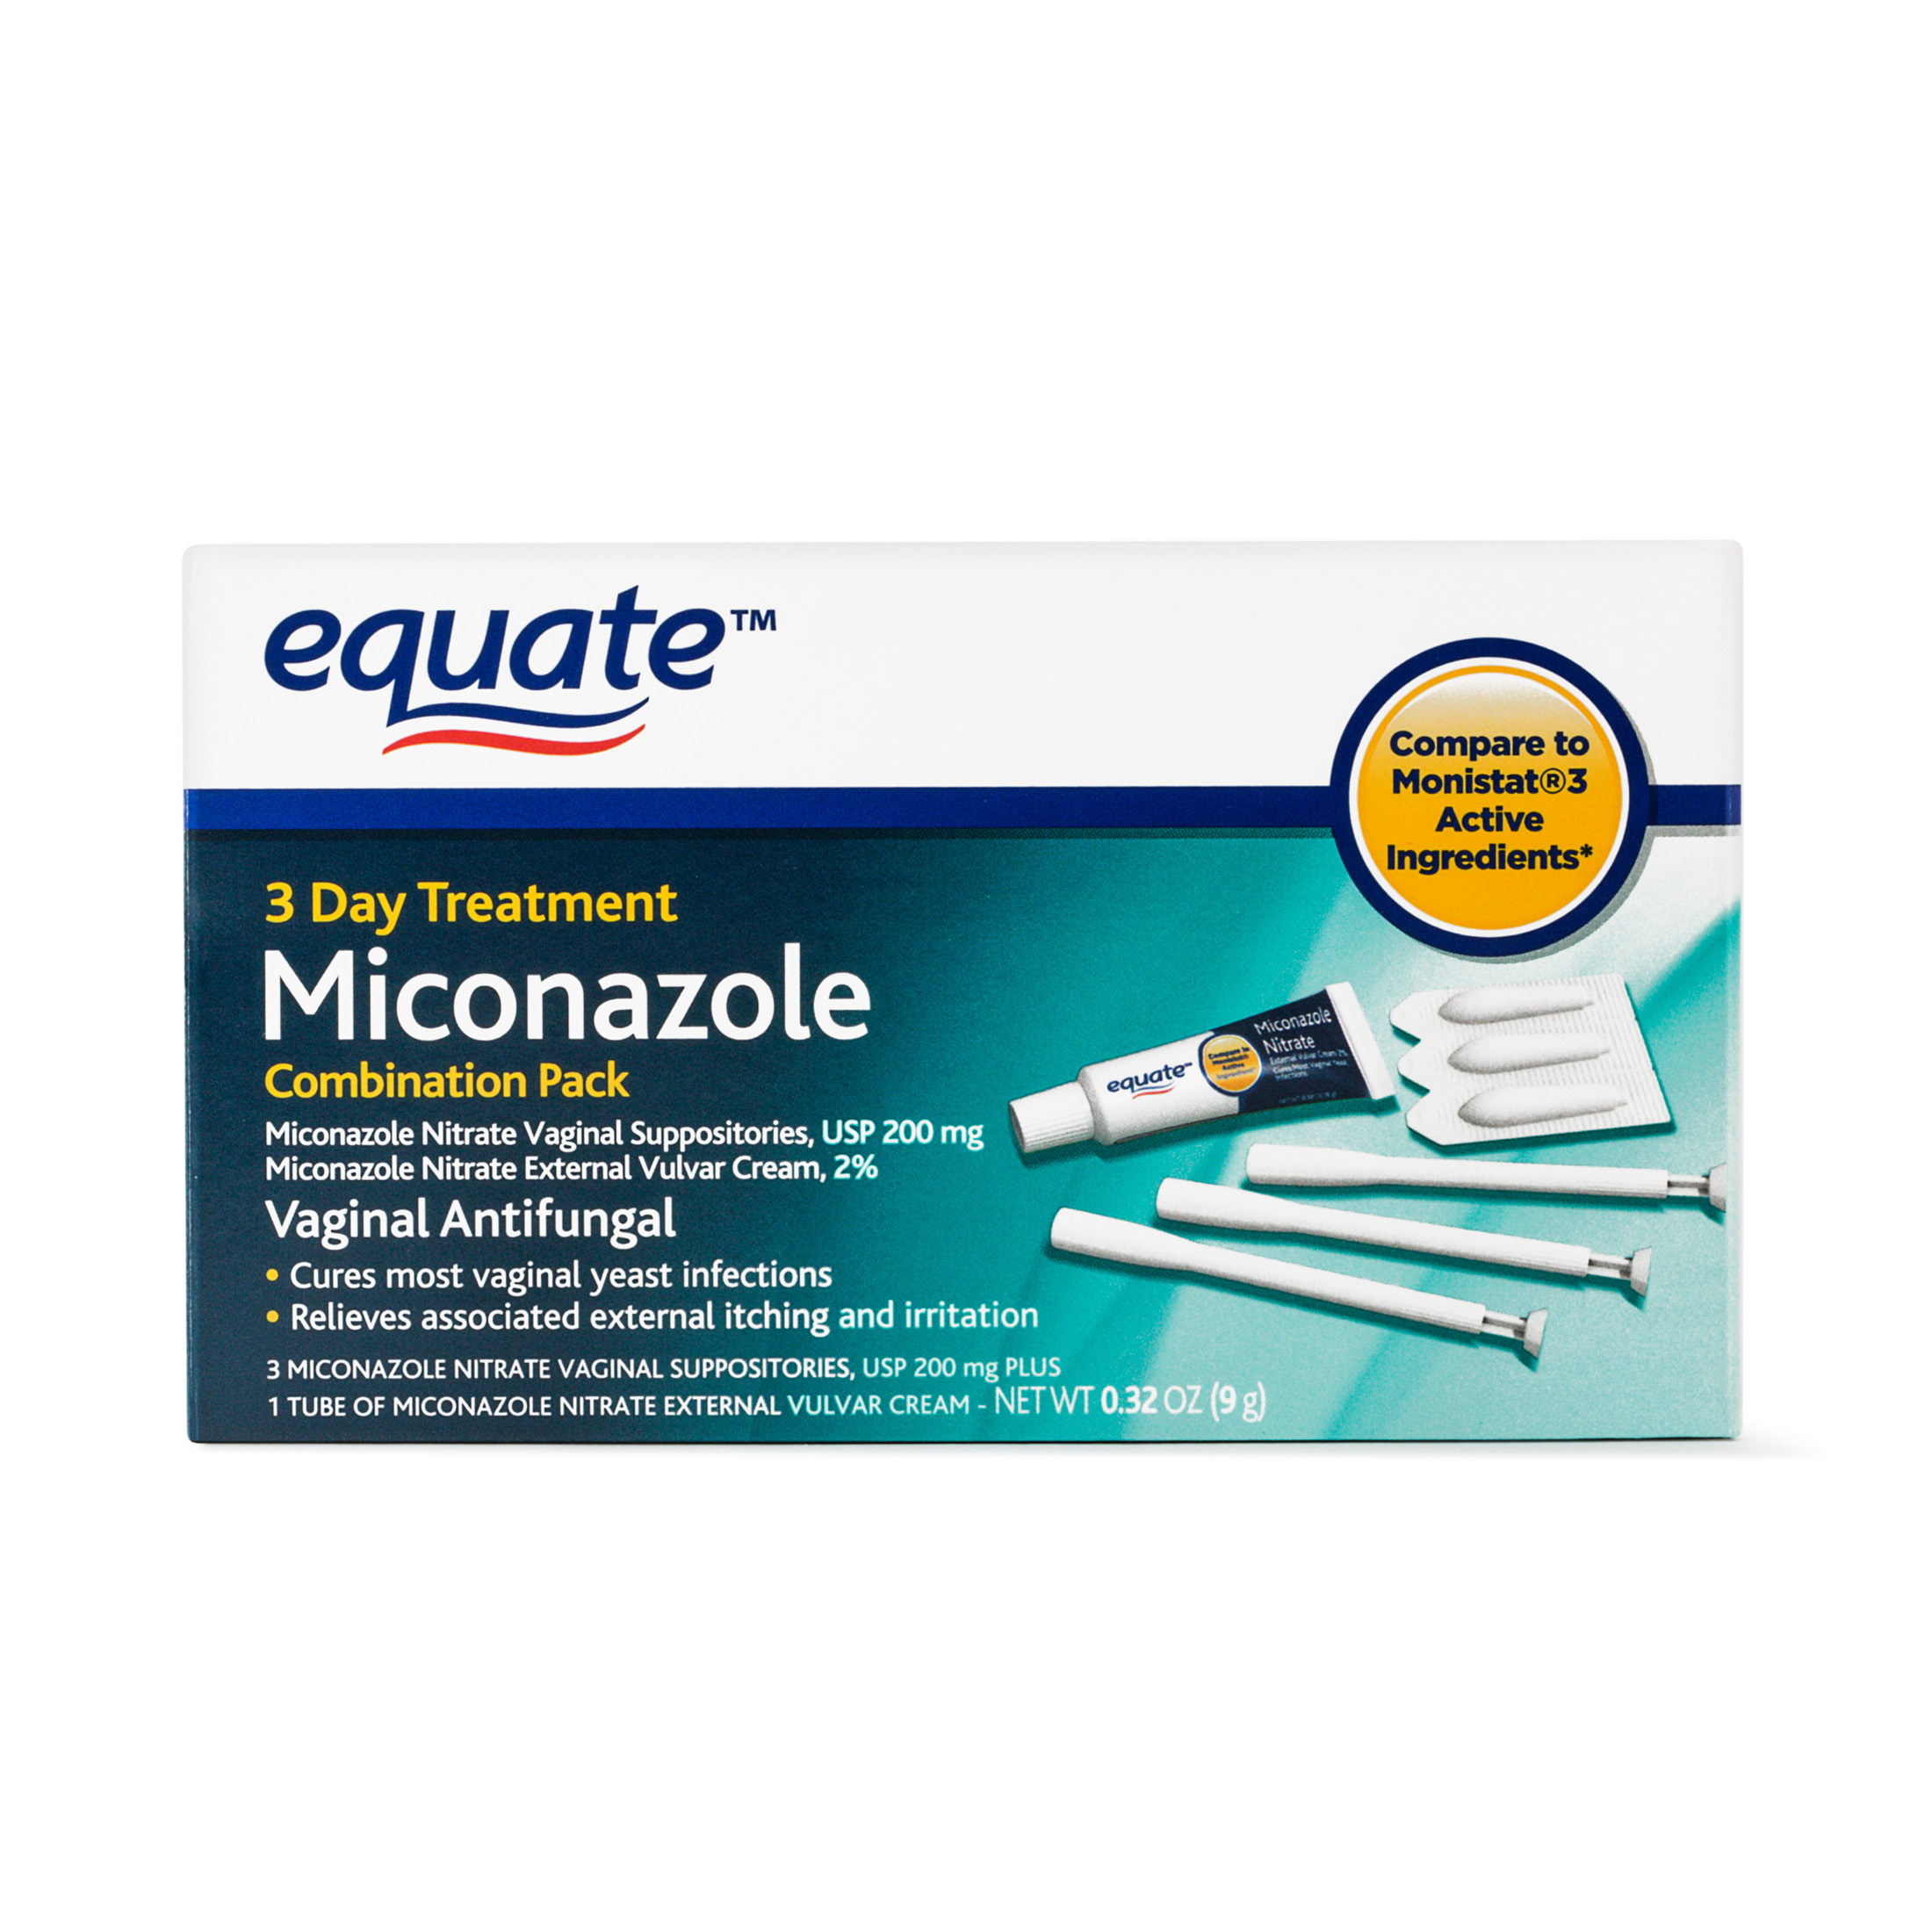 Equate Miconazole 3-Day Vaginal Cream Treatment, 2% External Vulvar Cream And 200 Mg Suppositories With Disposable Applicators - image 1 of 7